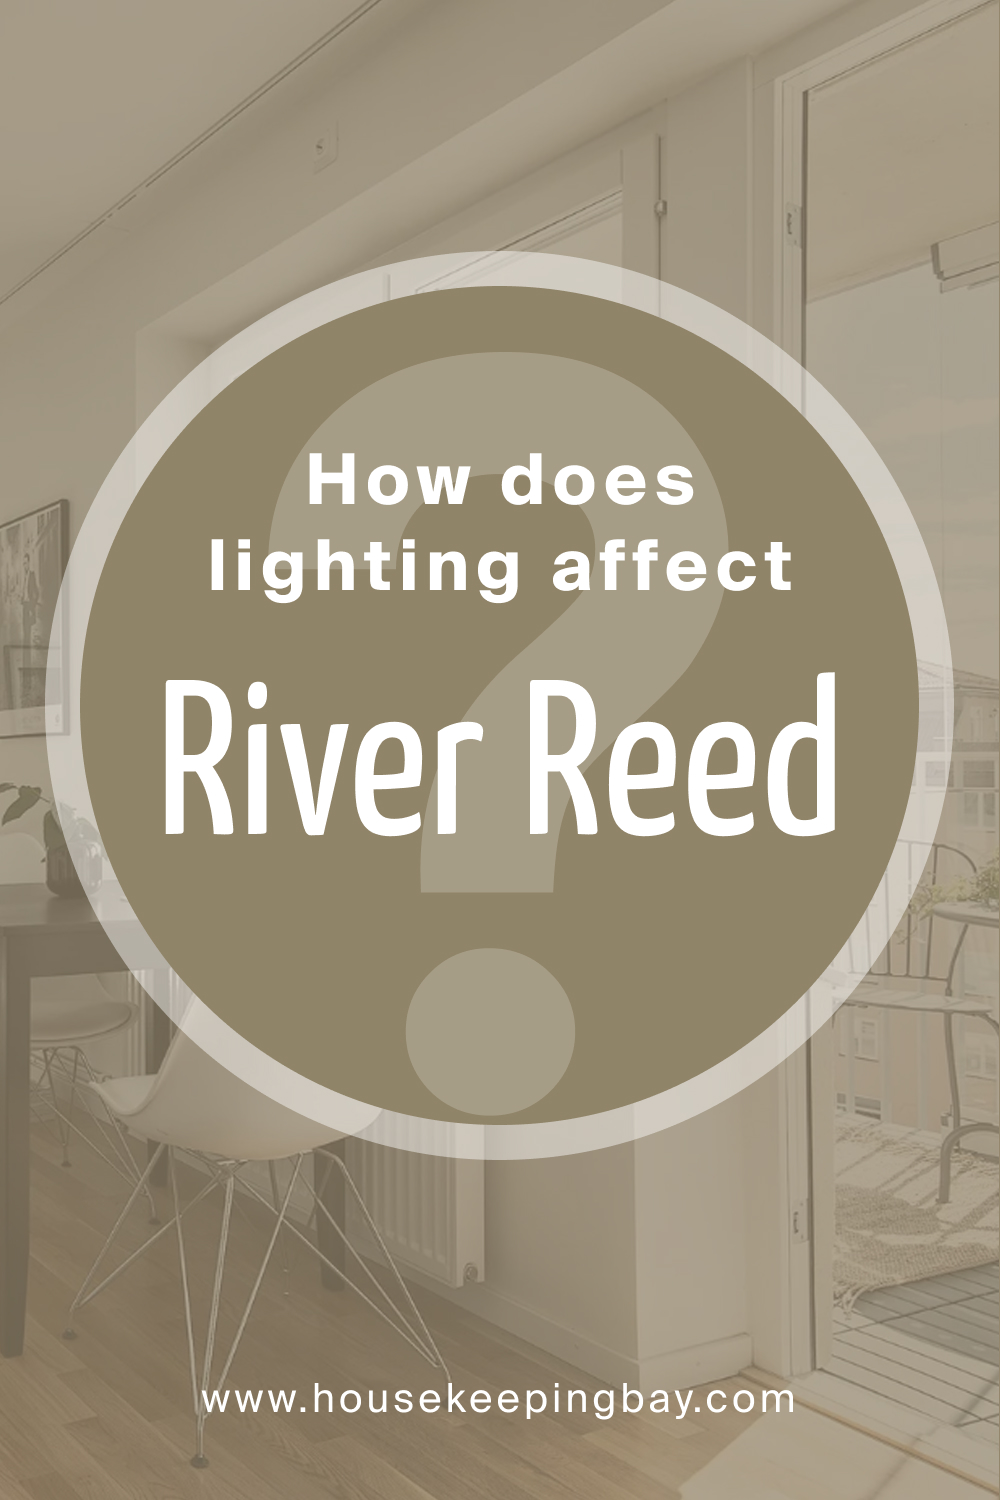 How does lighting affect SW 9534 River Reed